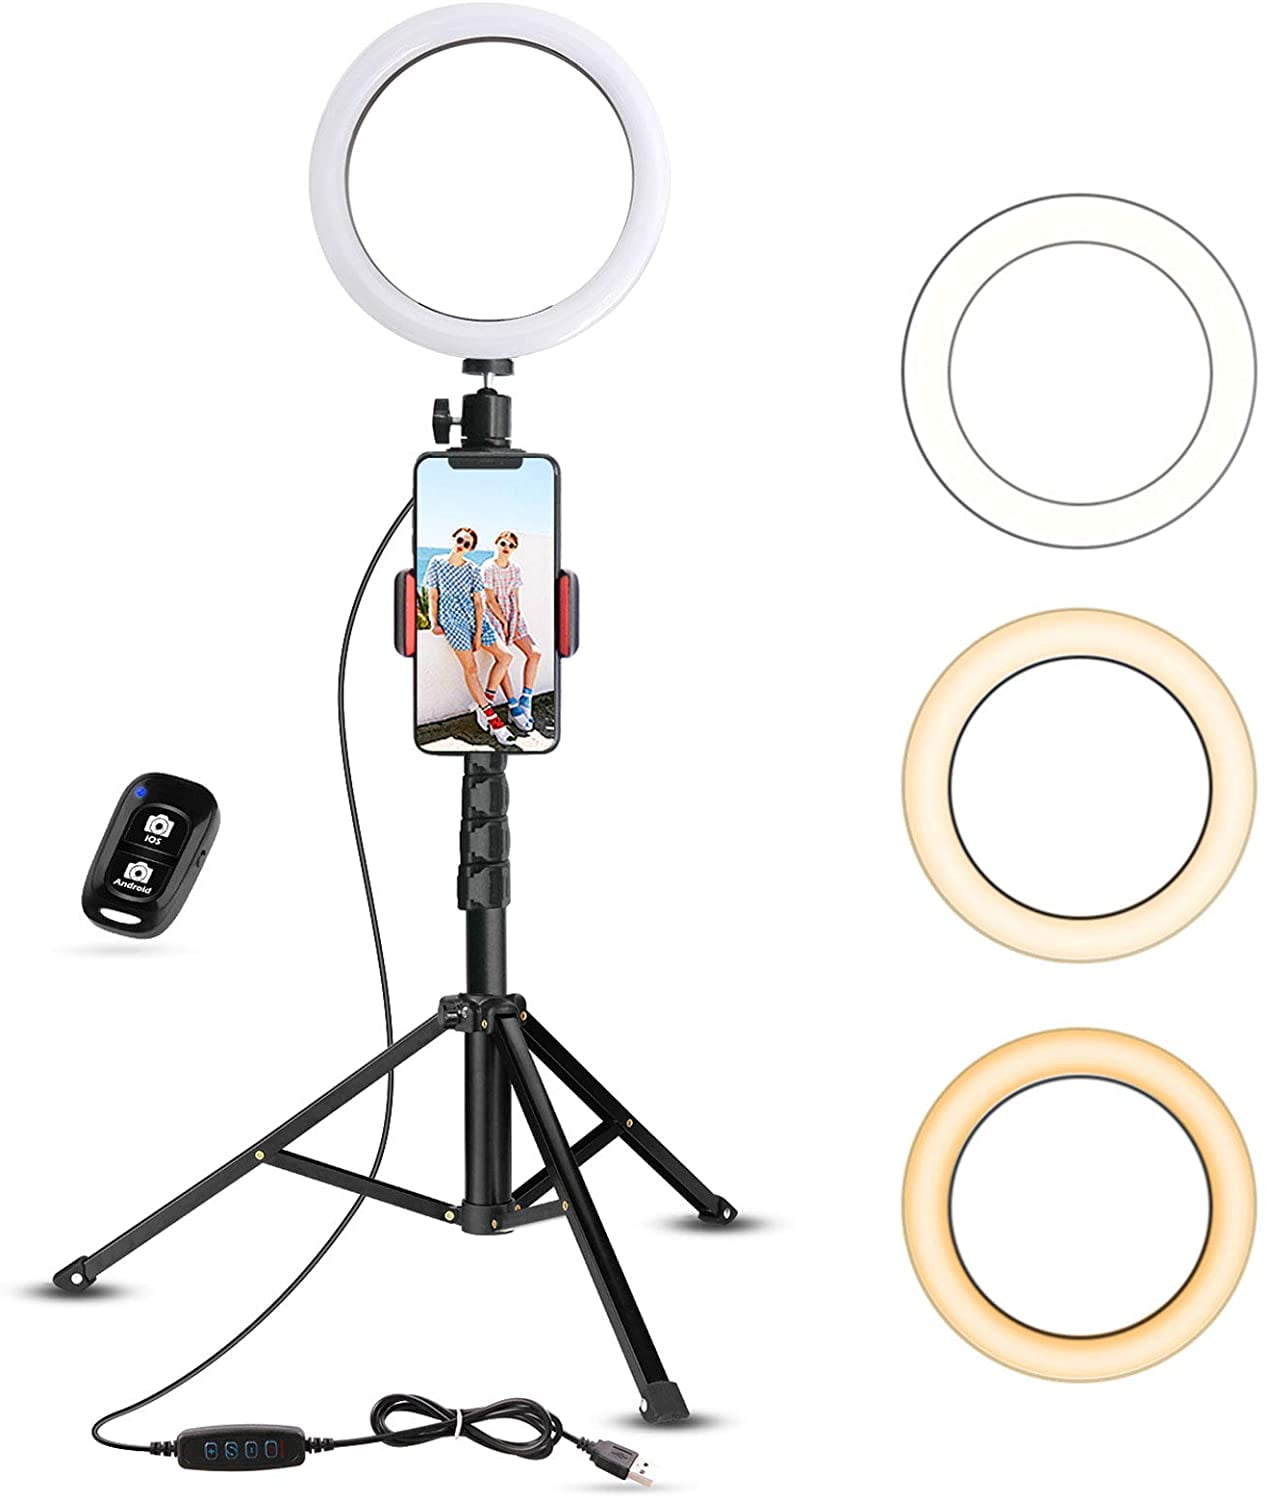 18 Inch LED Ring Light Kit with Tripod Stand & Phone Holder for Meeting Makeup Photography Selfie Ringlight 3 Modes 11 Brightness Levels for Video Recording TikTok YouTube Live Stream